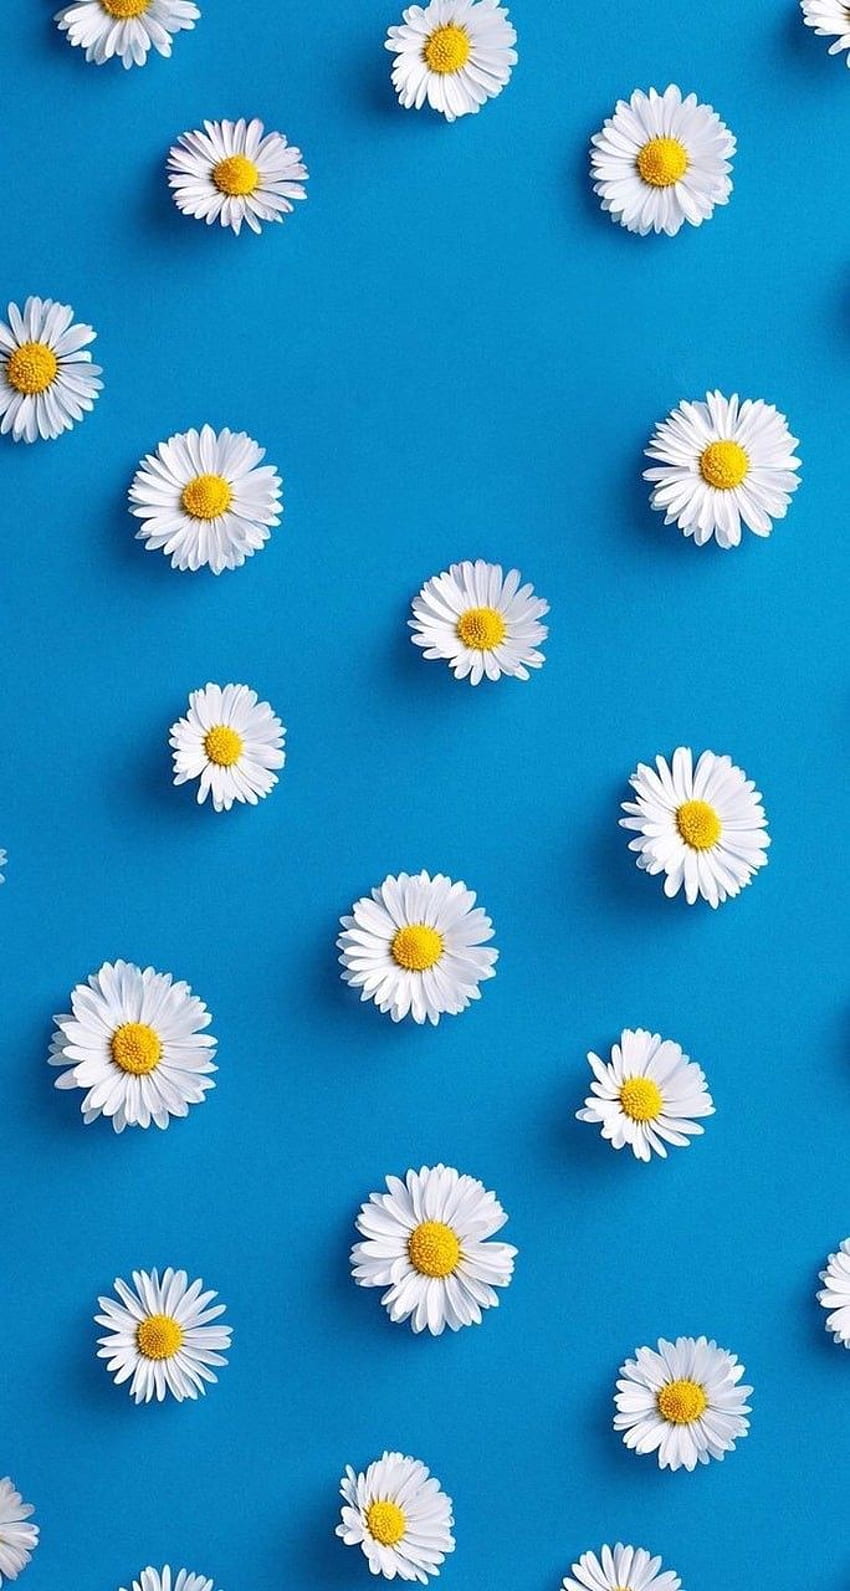 Pastel Cute Daisy Wallpapers Images  Free Download on Freepik